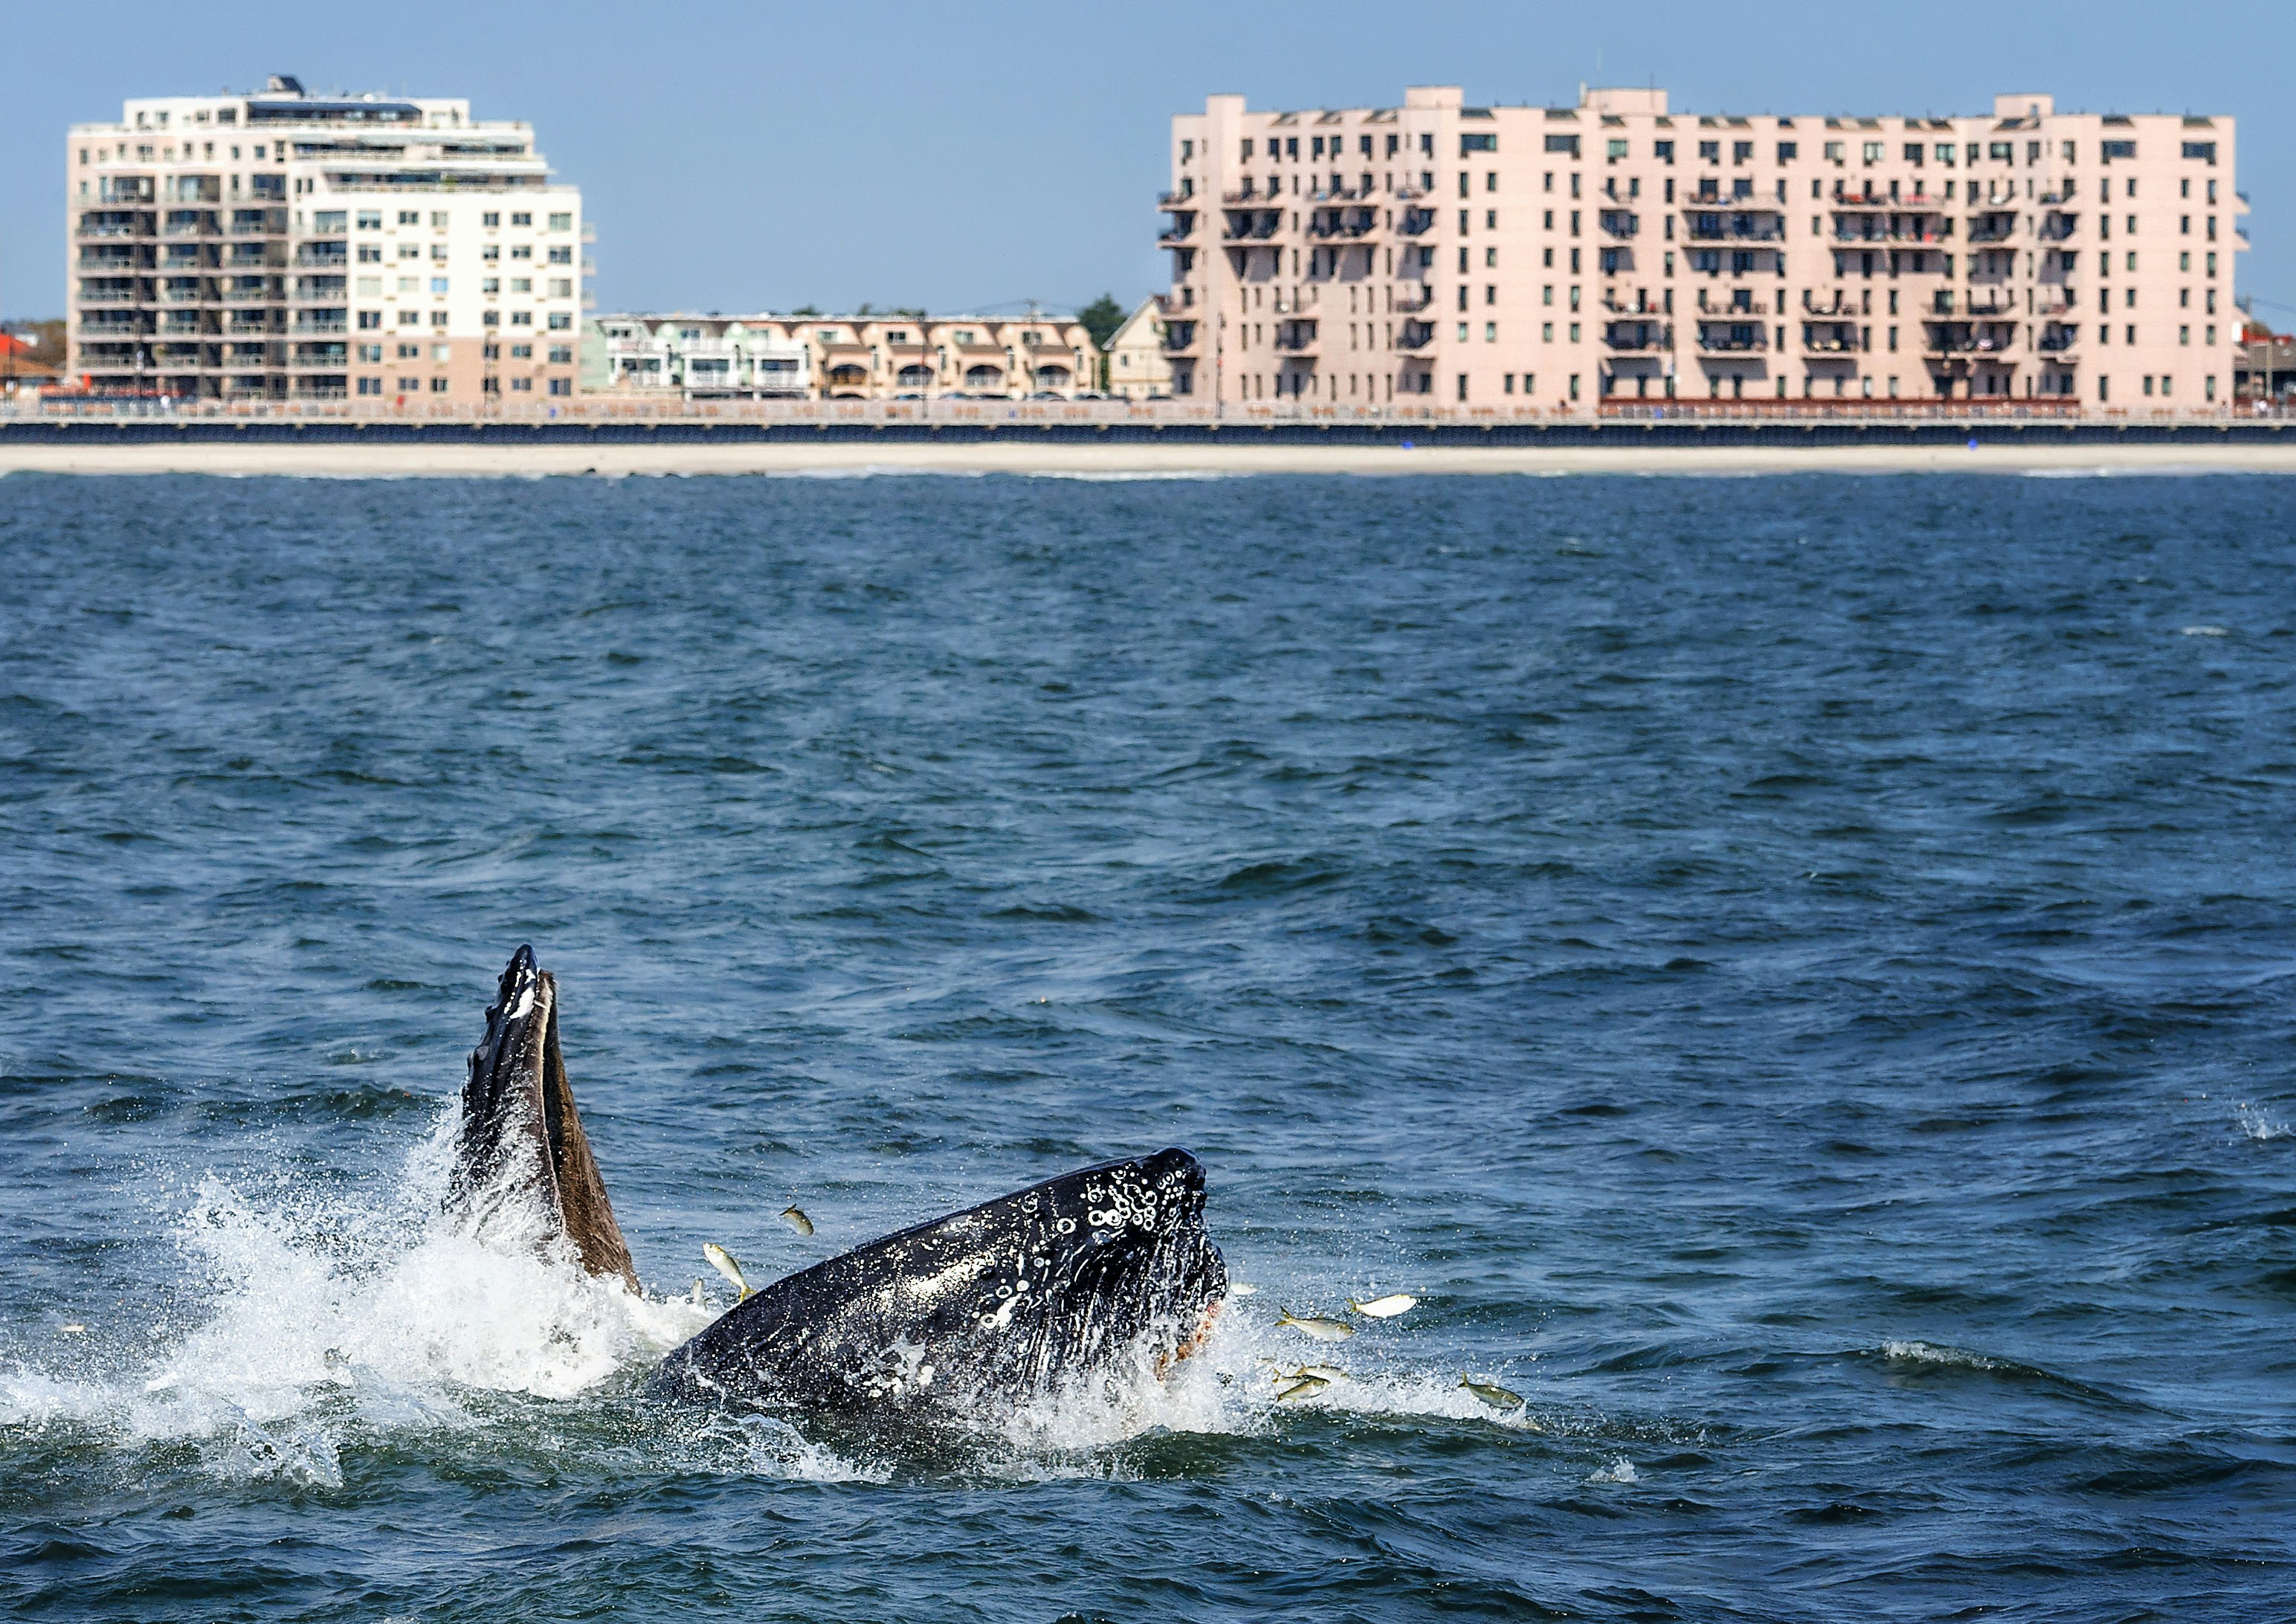 Humpback whale feeding off Long Island. Image by Vicki Jauron, Babylon and Beyond Photography / Moment Open / Getty